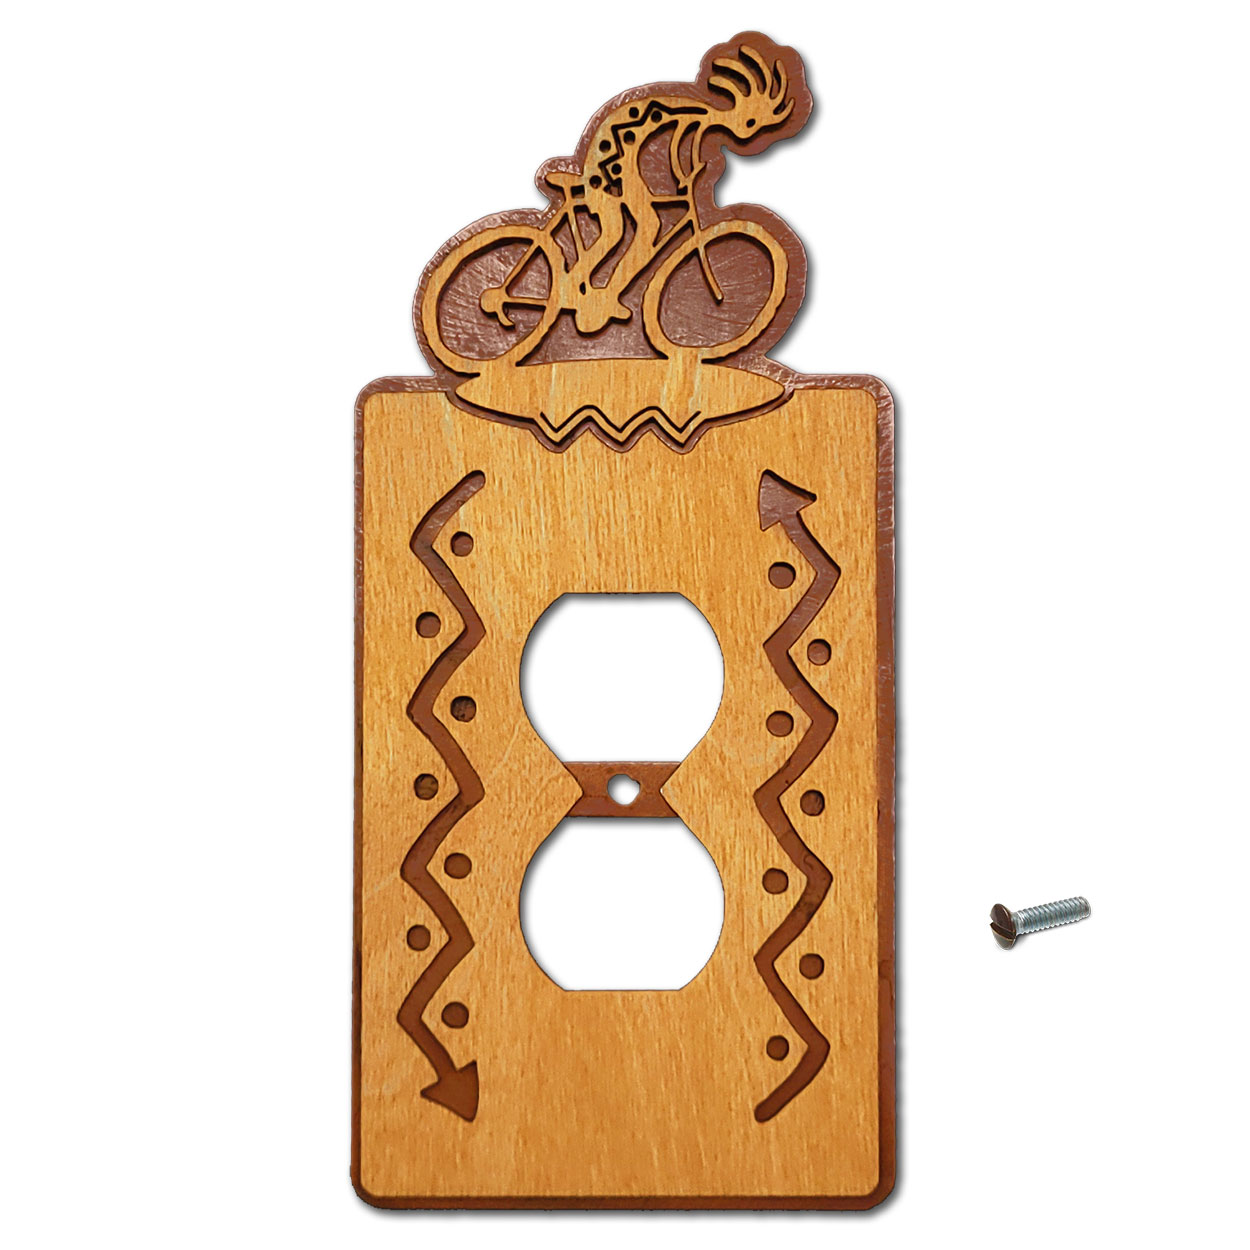 167520 - Bicyclist Cycling Theme Single Outlet Cover in Golden Sienna